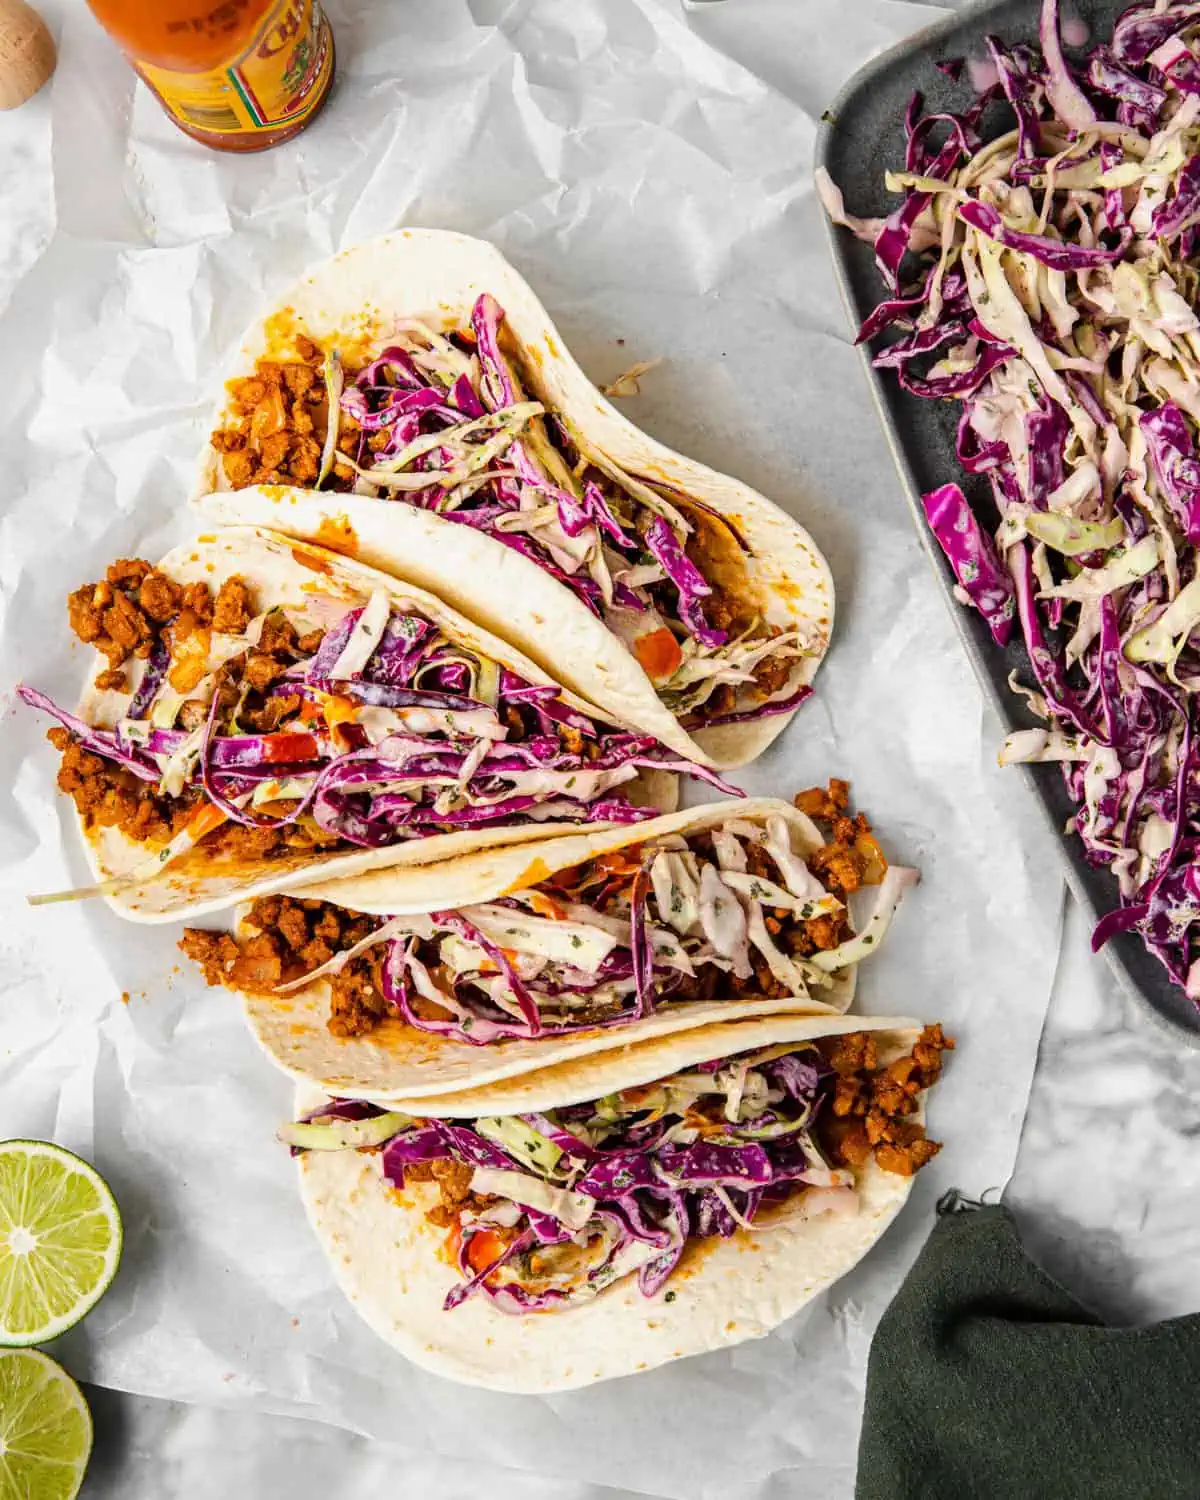 four pork tacos in a soft tortilla with cabbage slaw and hot sauce.